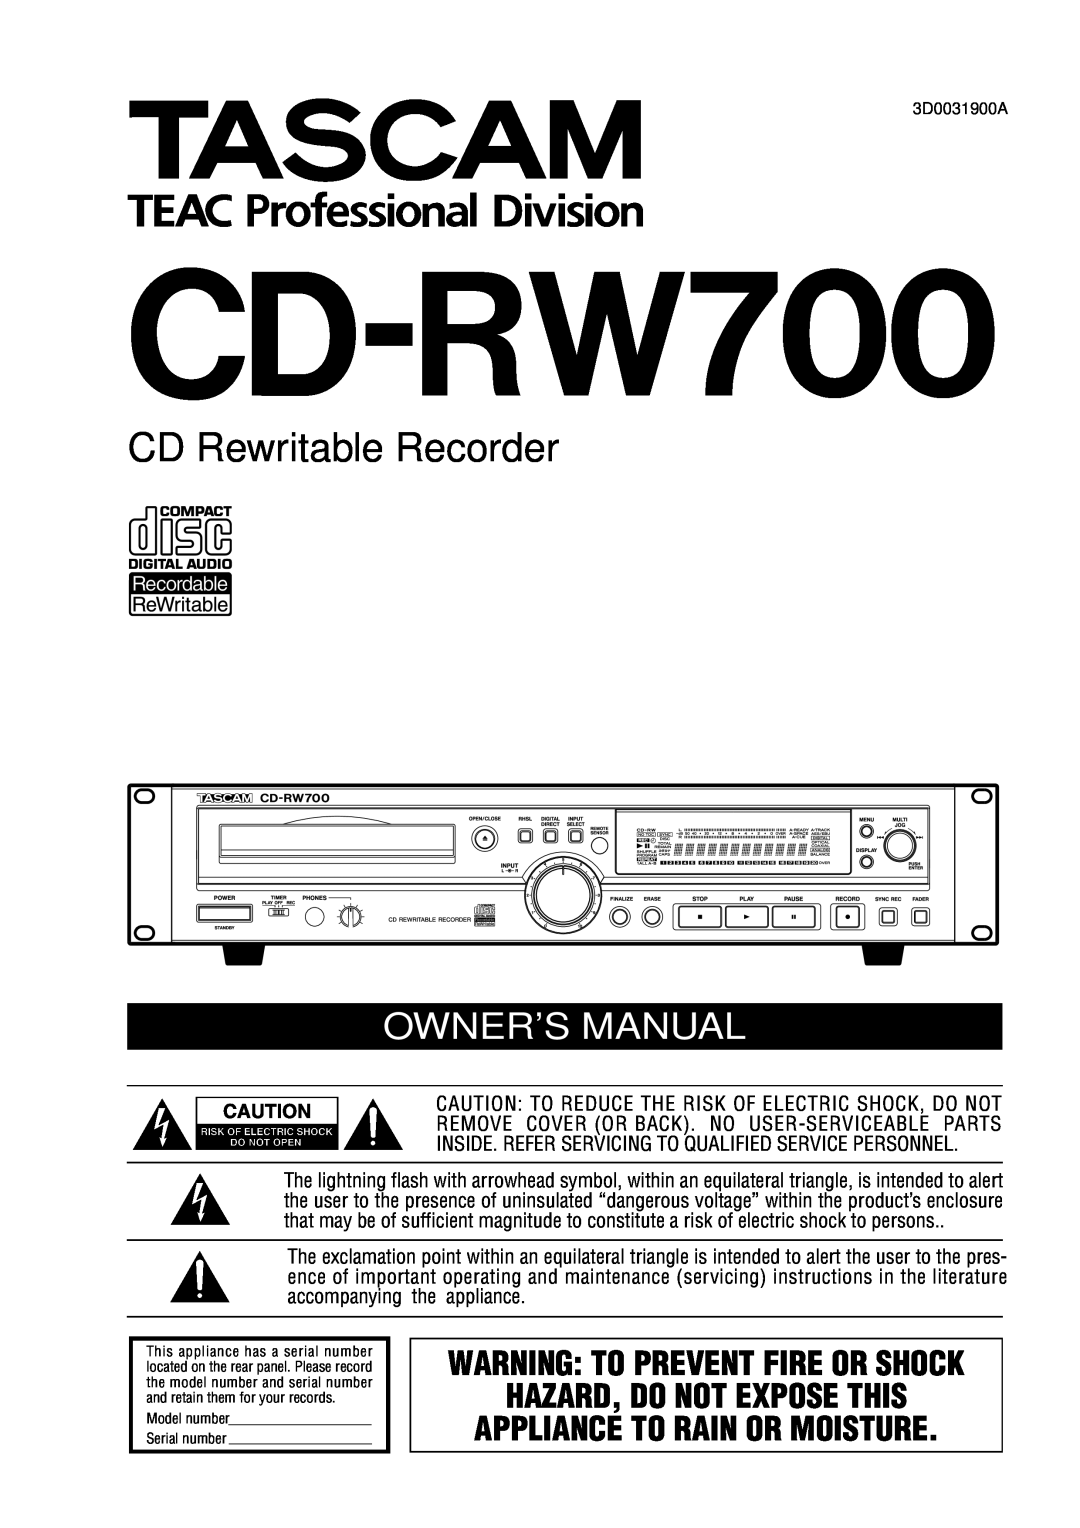 Tascam CD-RW700 owner manual CD Rewritable Recorder, Owner’S Manual, Hazard, Do Not Expose This, » 3D0031900A 